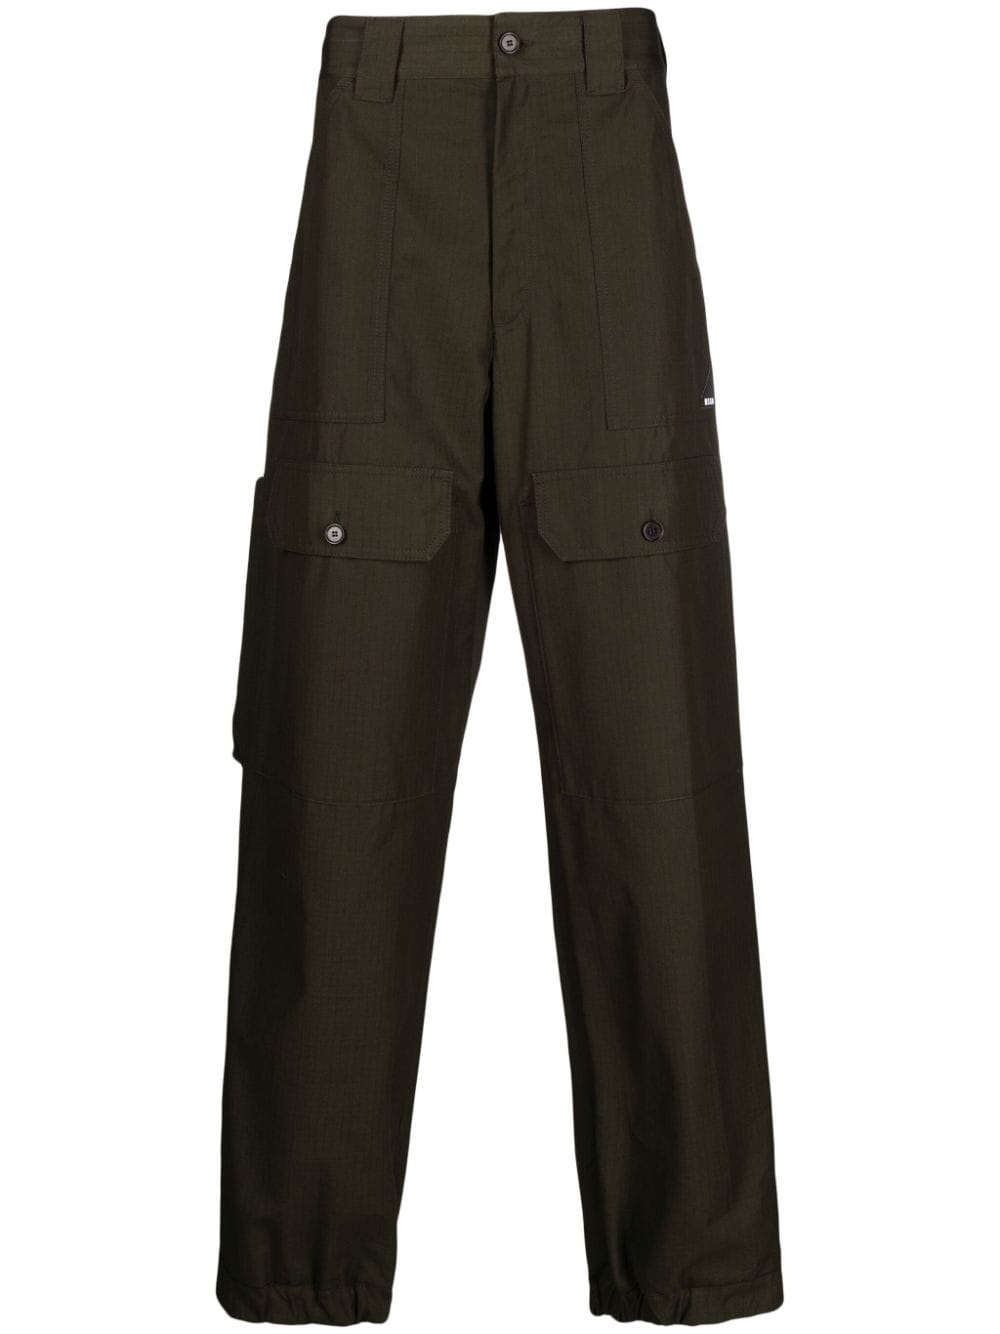 Tapered cotton trousers with pockets